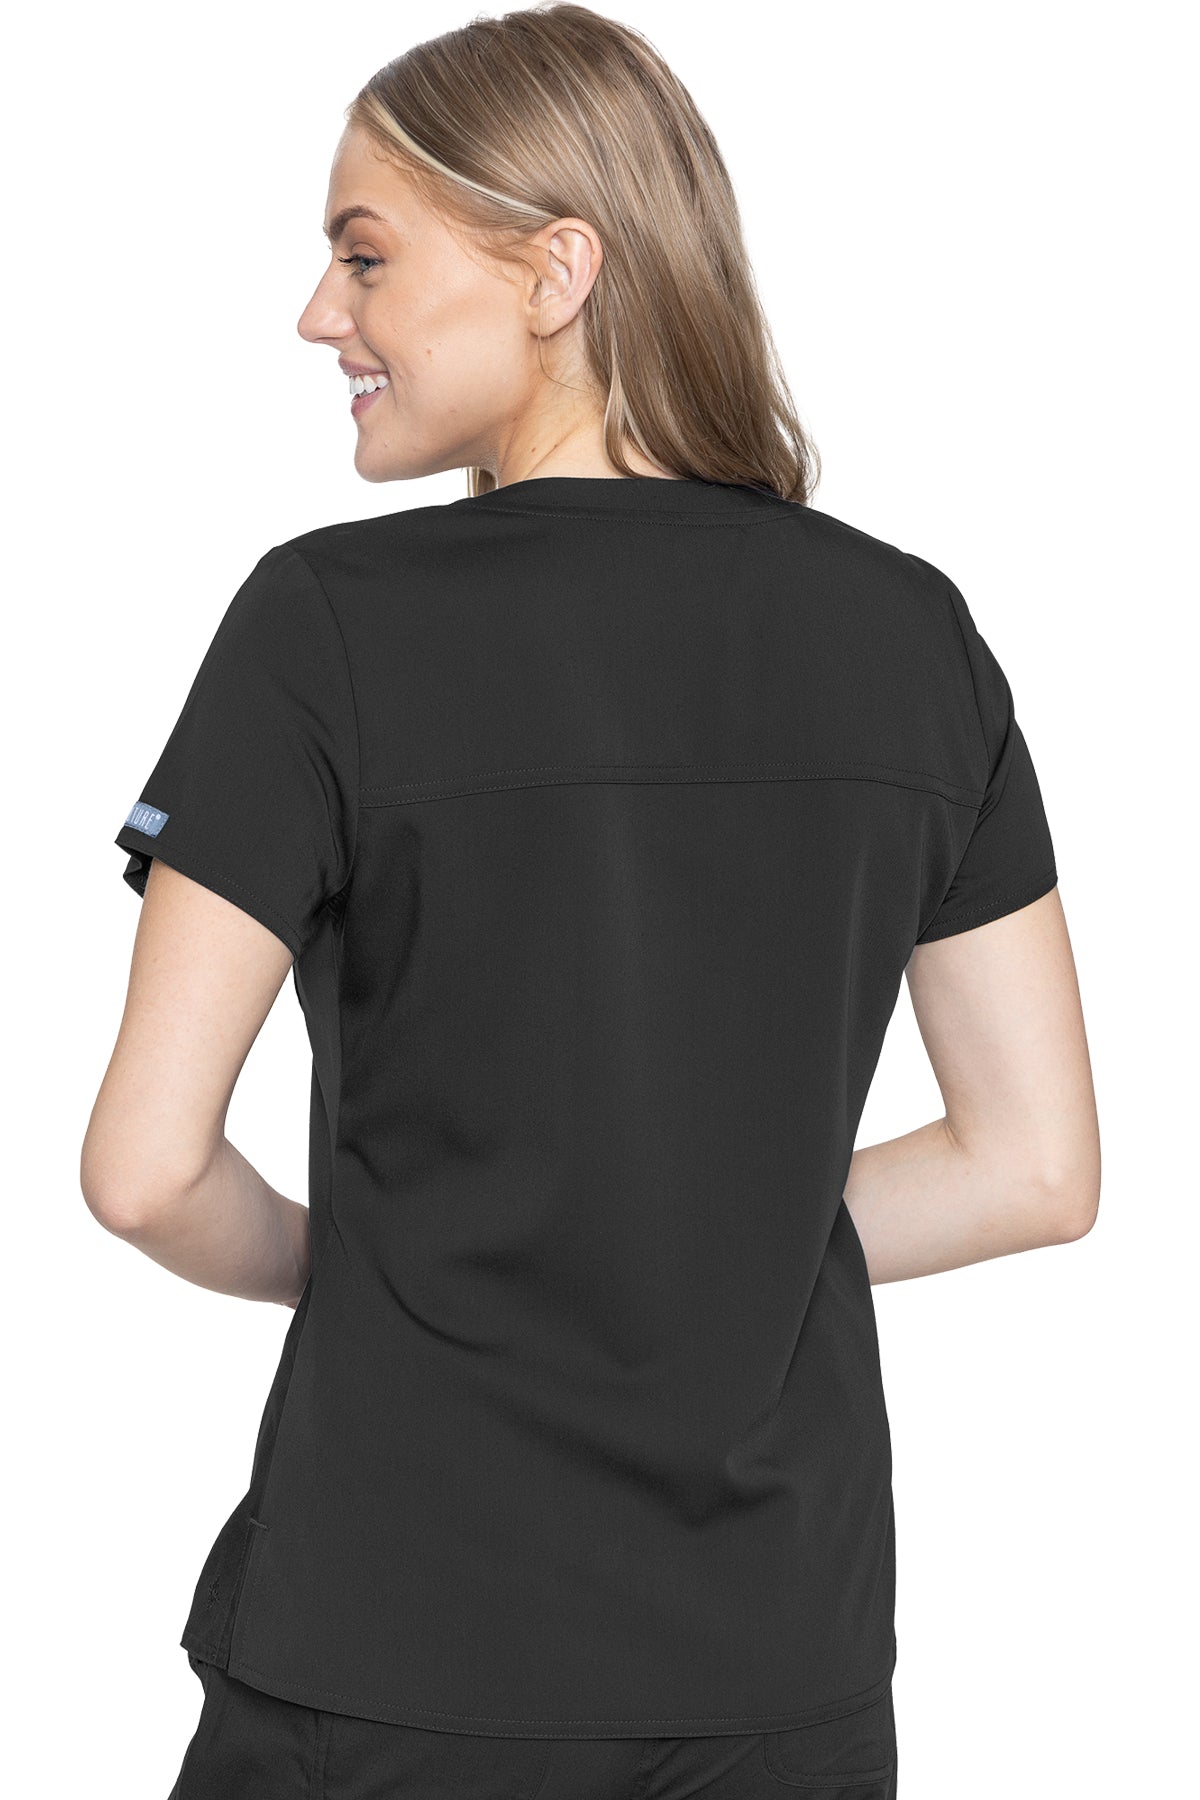 Med Couture Touch 7448 Women's Tuckable Chest Pocket Top Black back